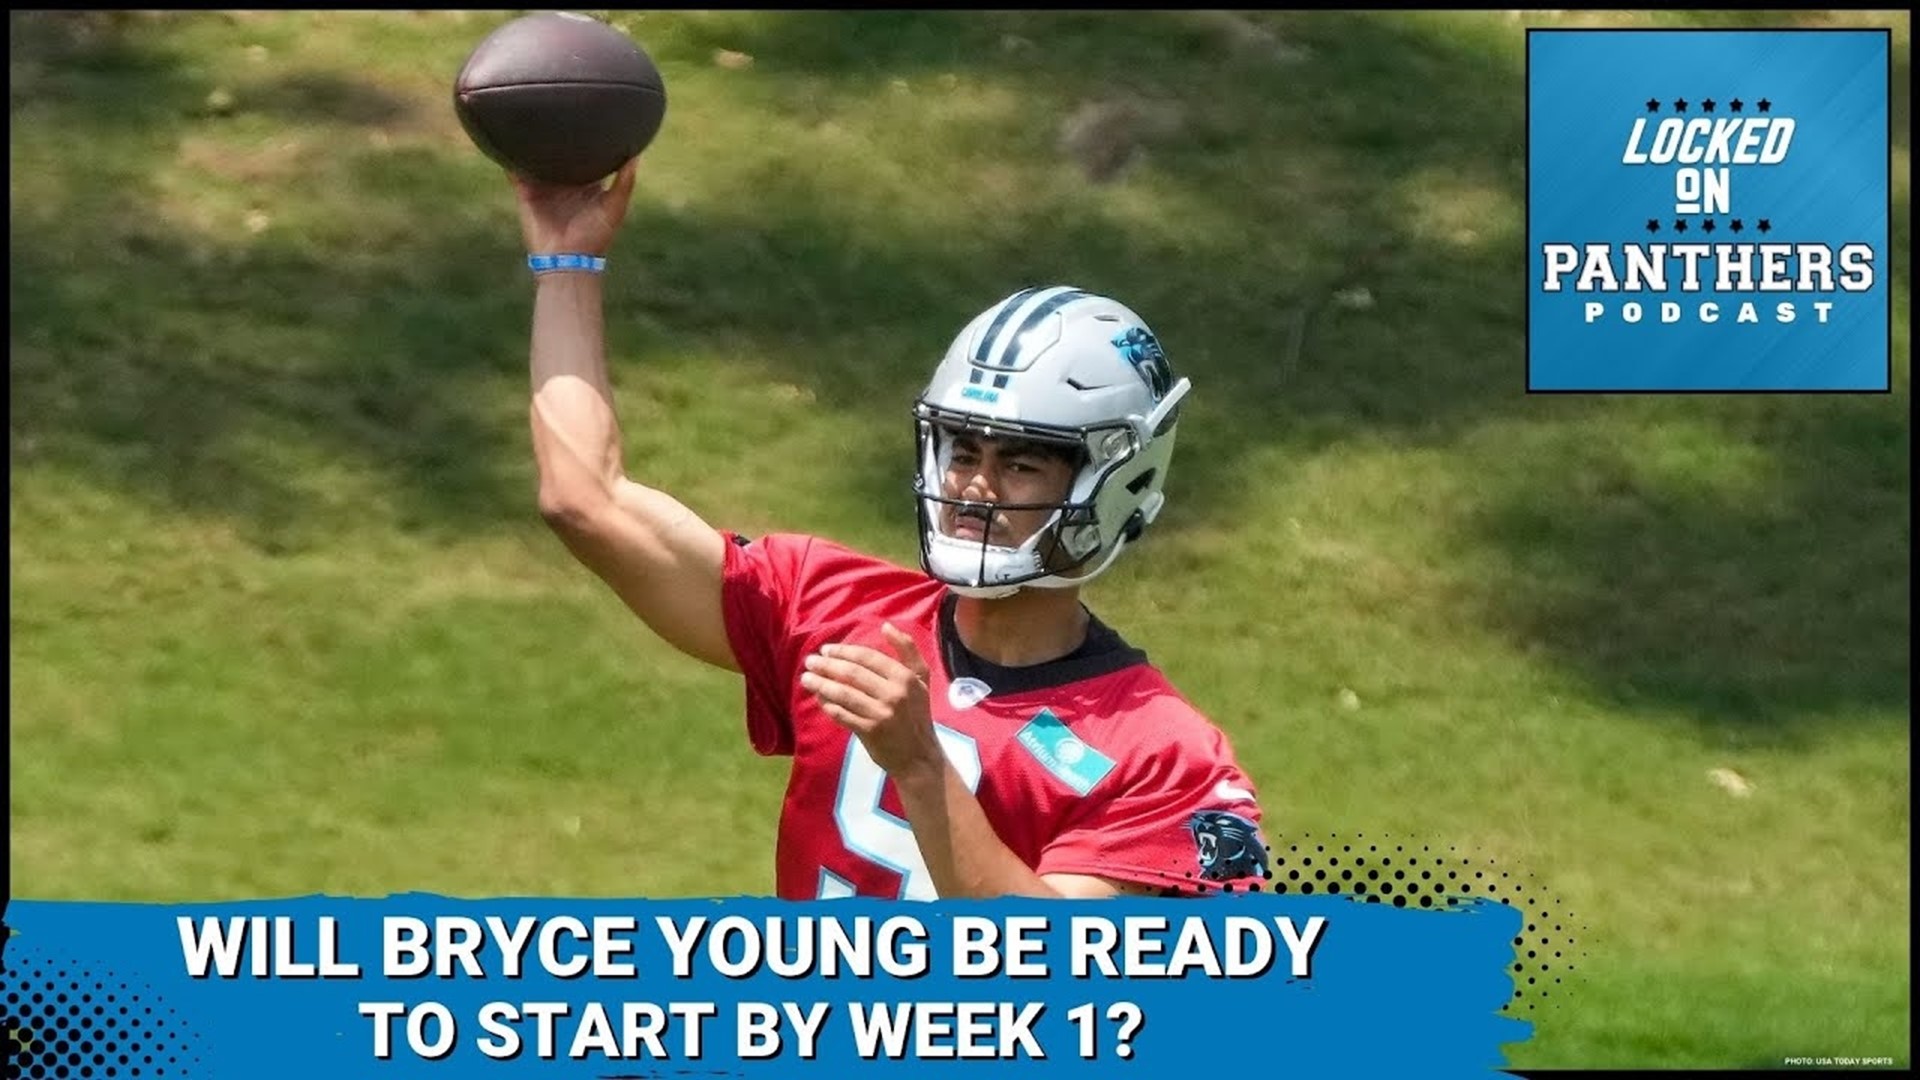 Over the weekend the Carolina Panthers conducted their Rookie Minicamp where top draft pick Bryce Young took the practice field for the first time as a Panther.